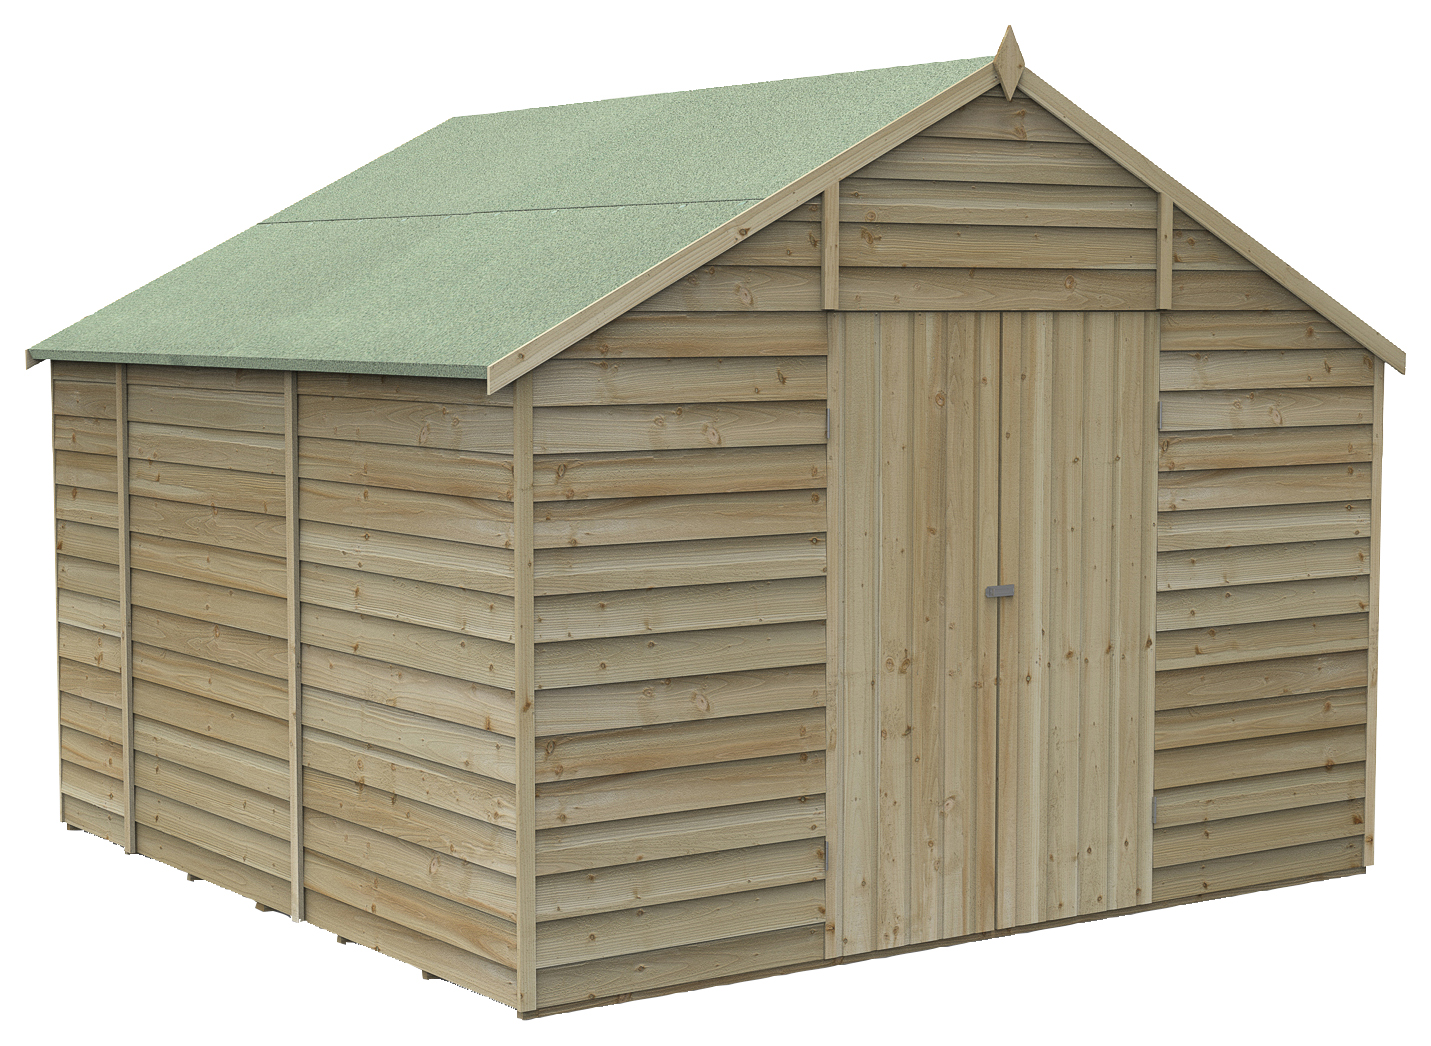 Image of Forest Garden 10 x 10ft 4Life Apex Overlap Pressure Treated Double Door Windowless Shed with Assembly